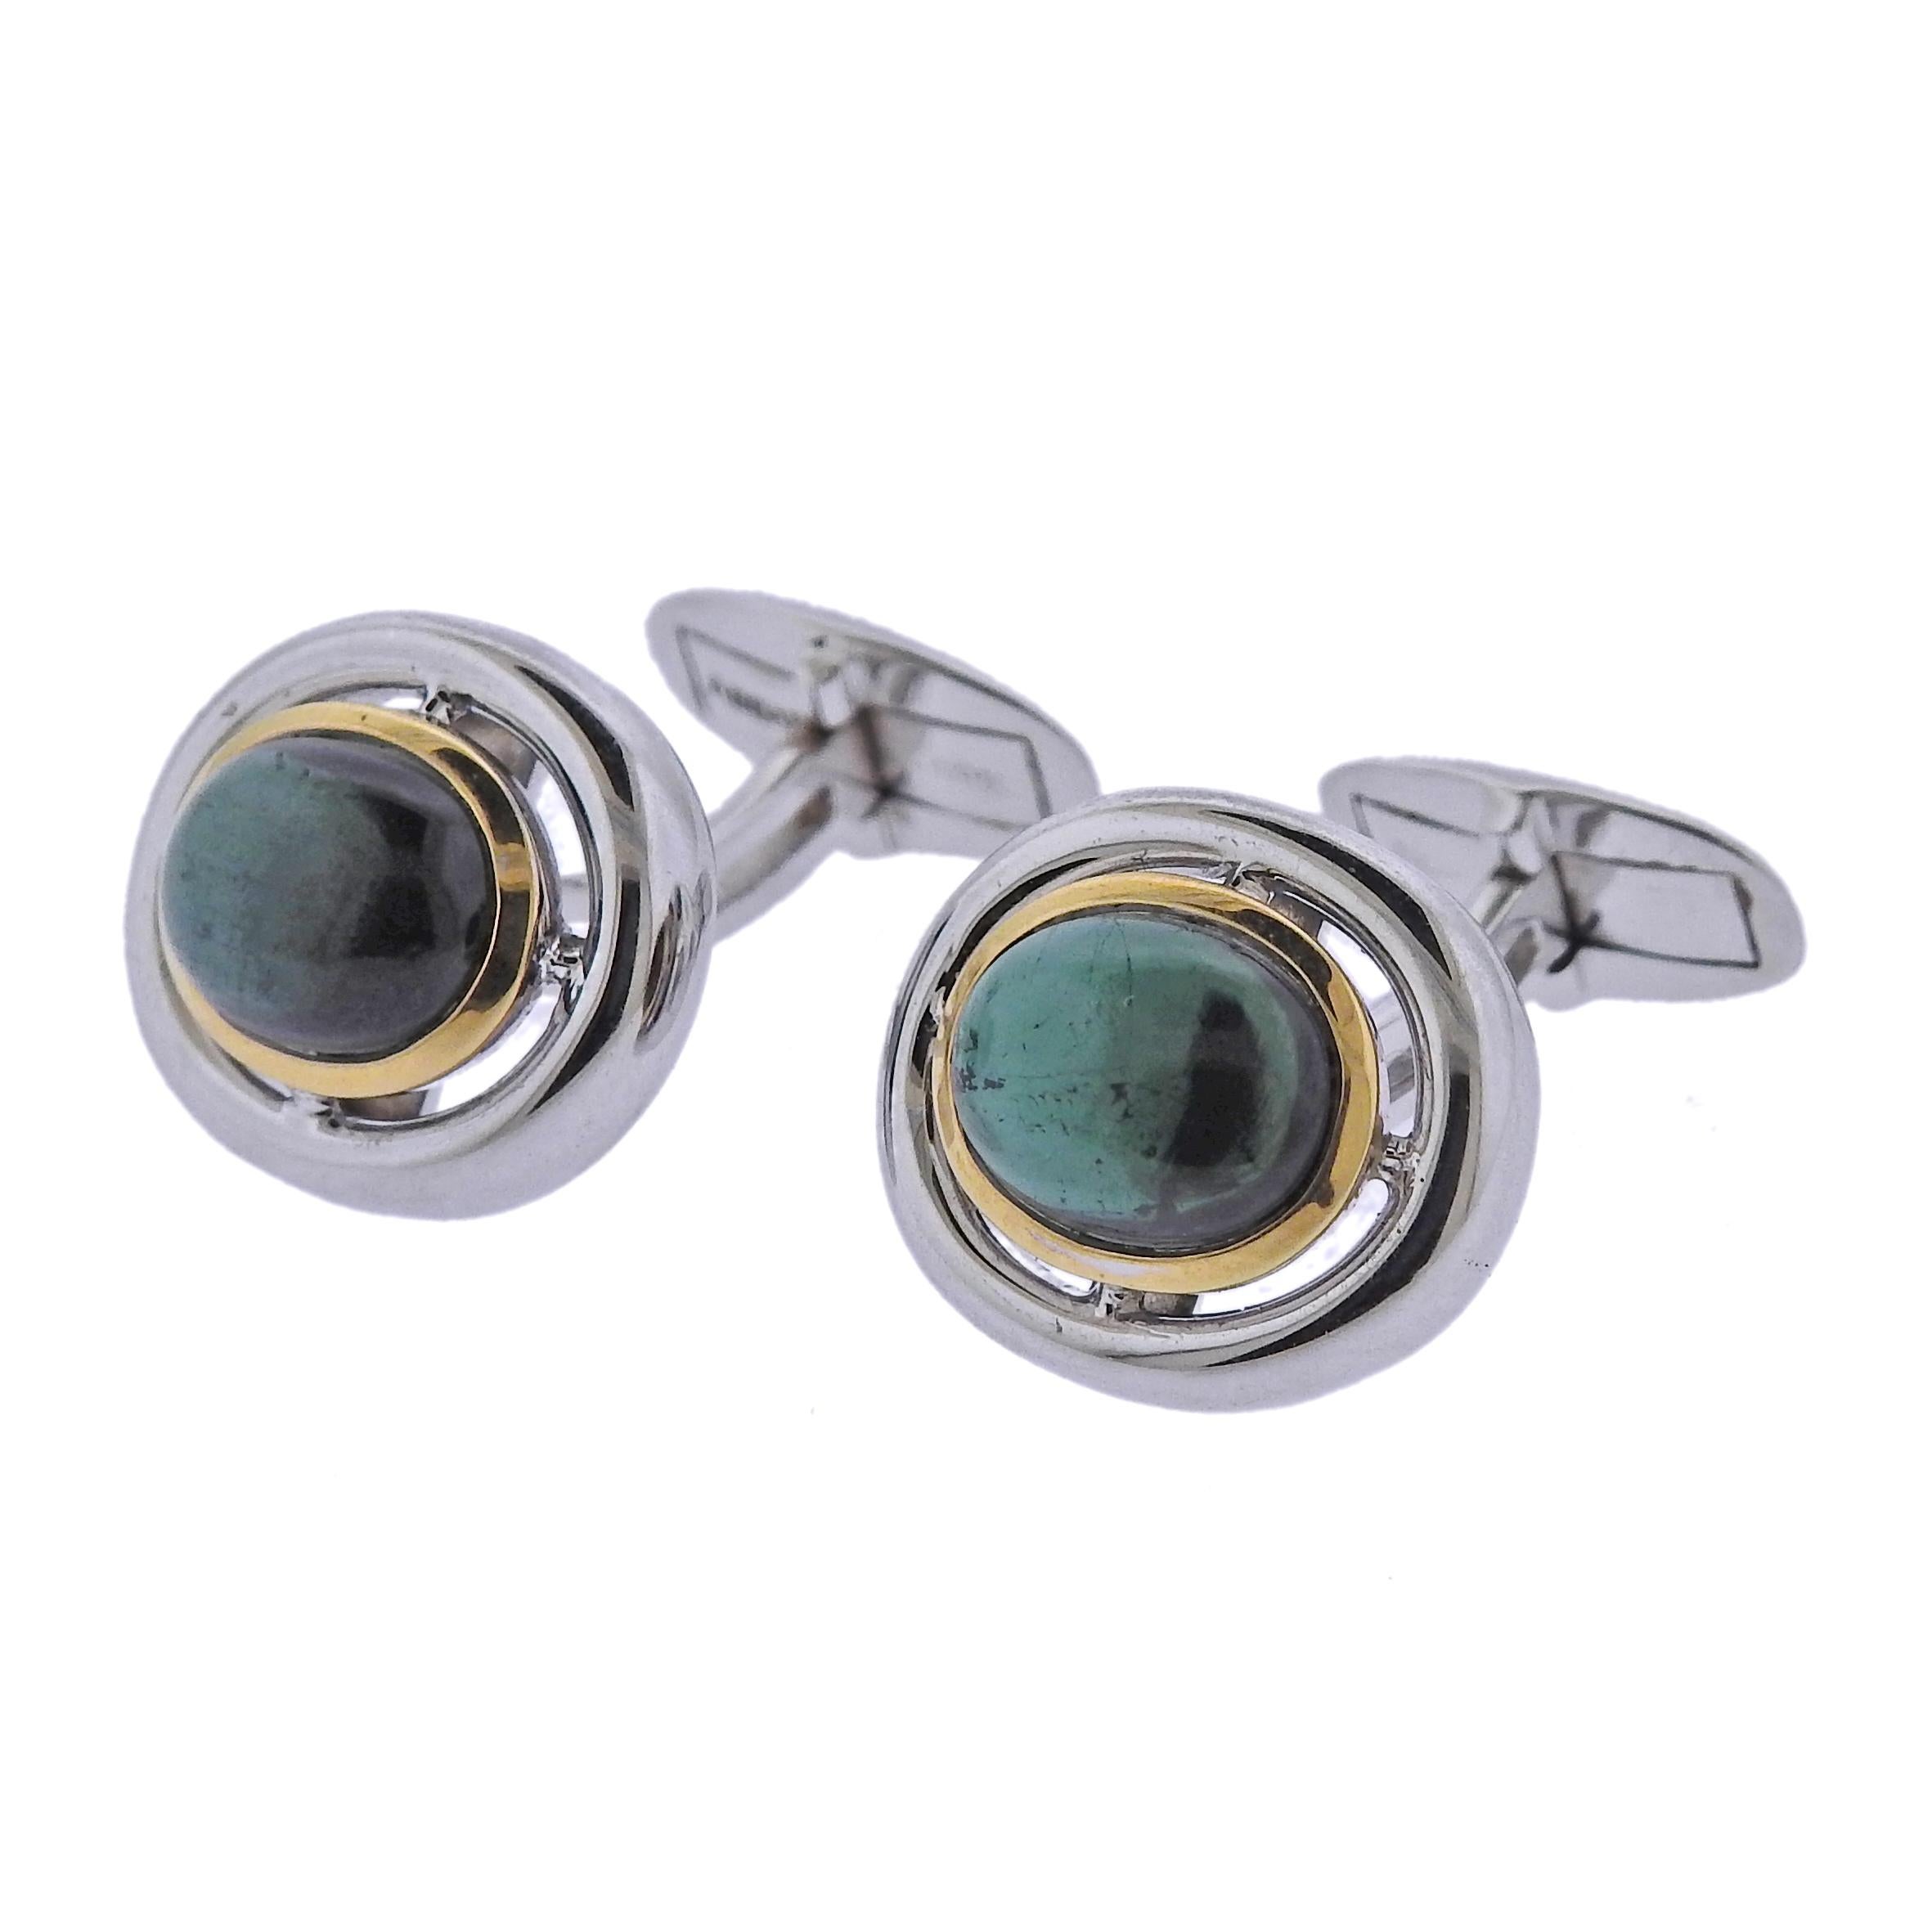 Pair of 18k gold cufflinks by Assael, with green tourmaline cabochons Retail $8300. Come with pouch.  Cufflinks are 16mm x 14mm. Weight - 12.2 grams. Marked: Assael 18k.